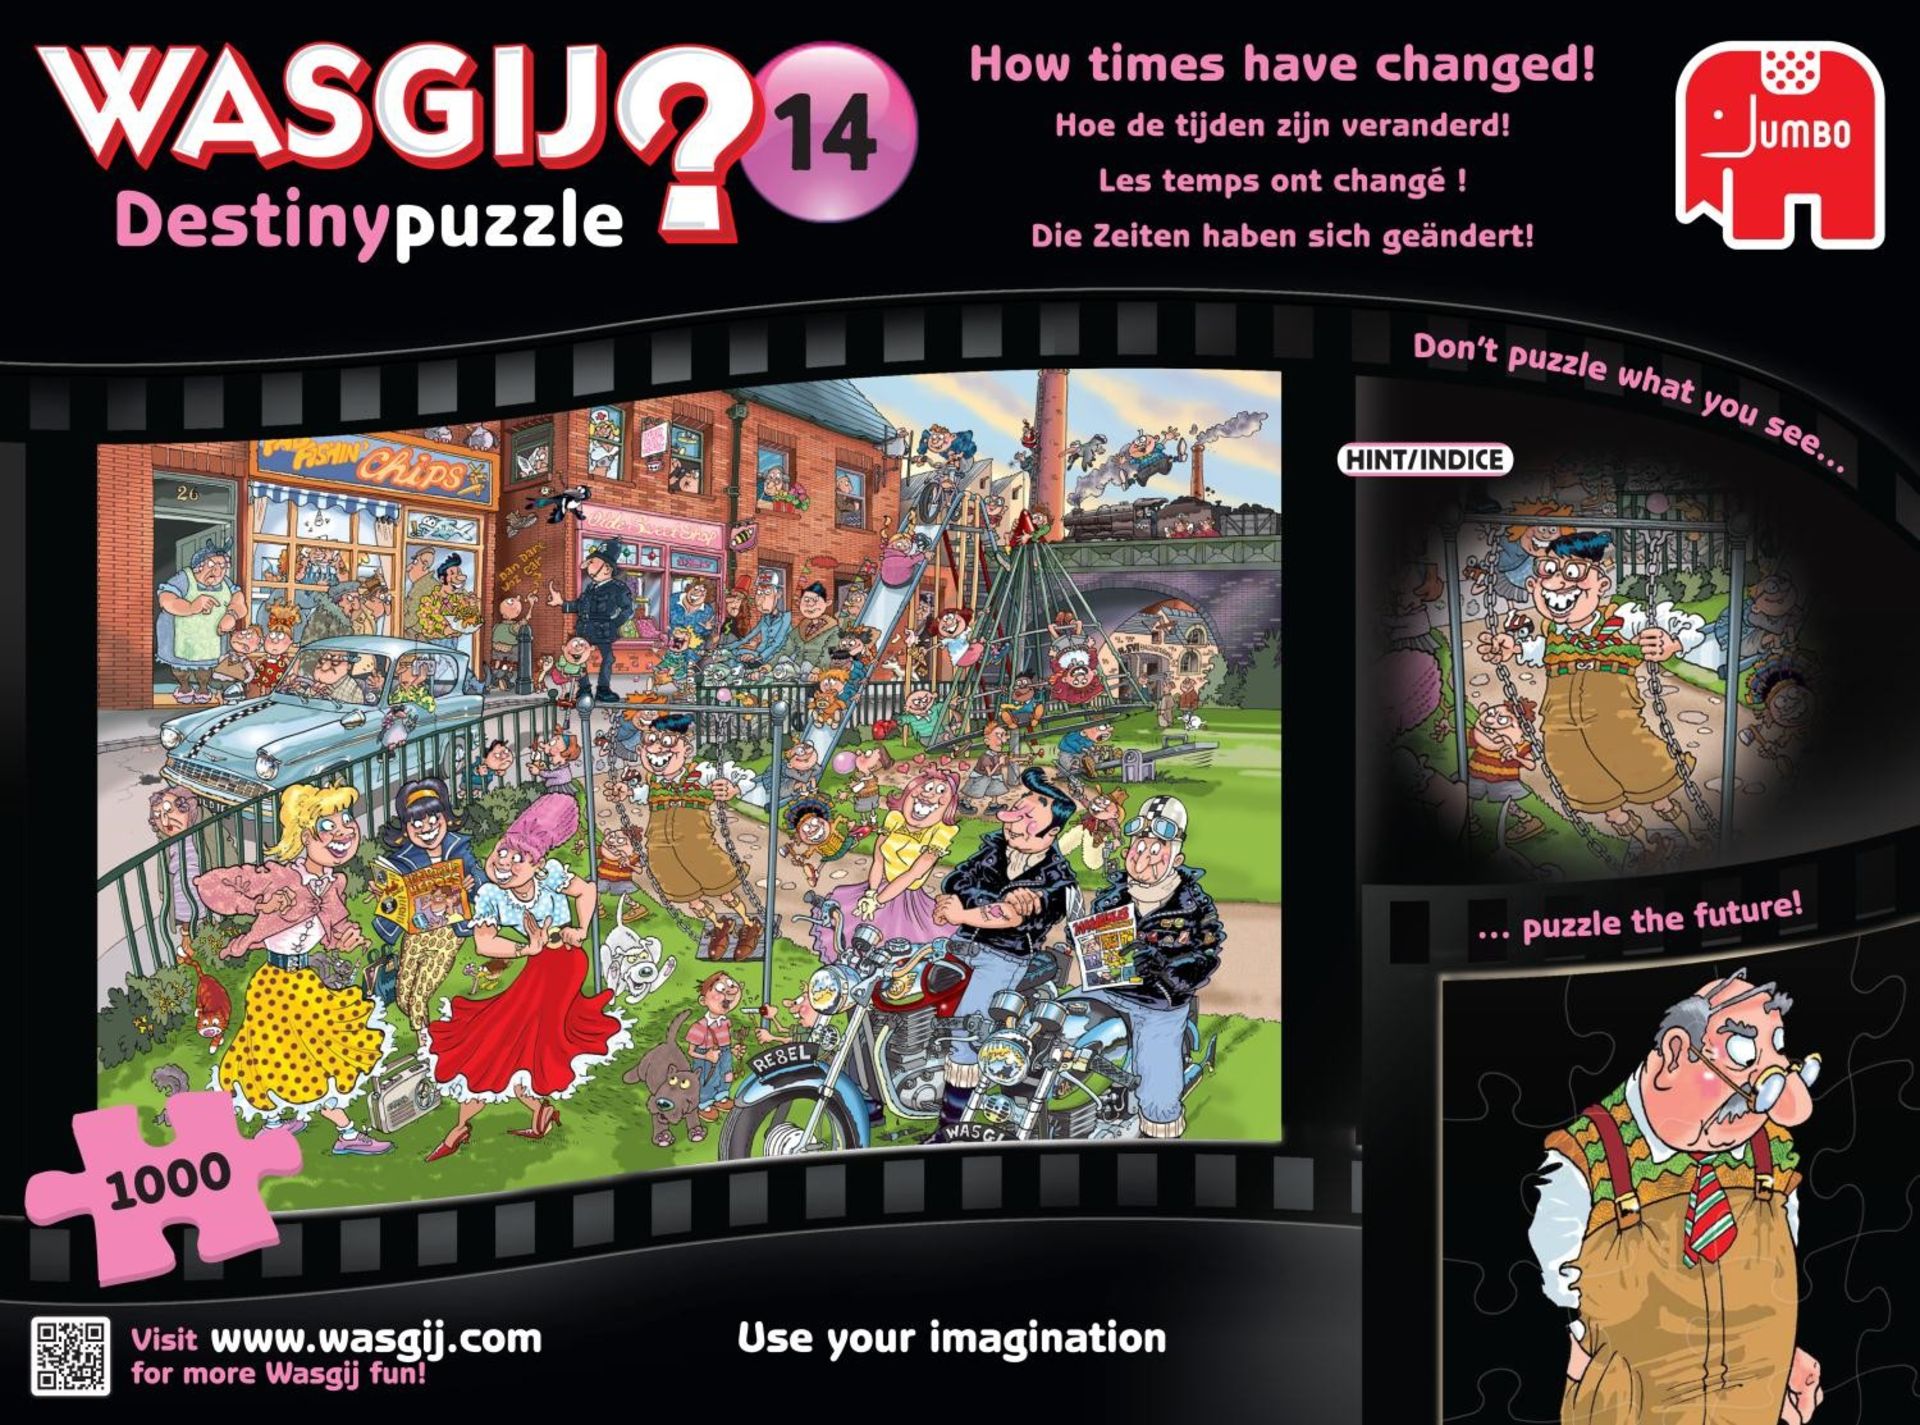 V  Grade A Wasgij 1000pce Destiny Puzzle "How Times Have Changed" X  2  Bid price to be multiplied